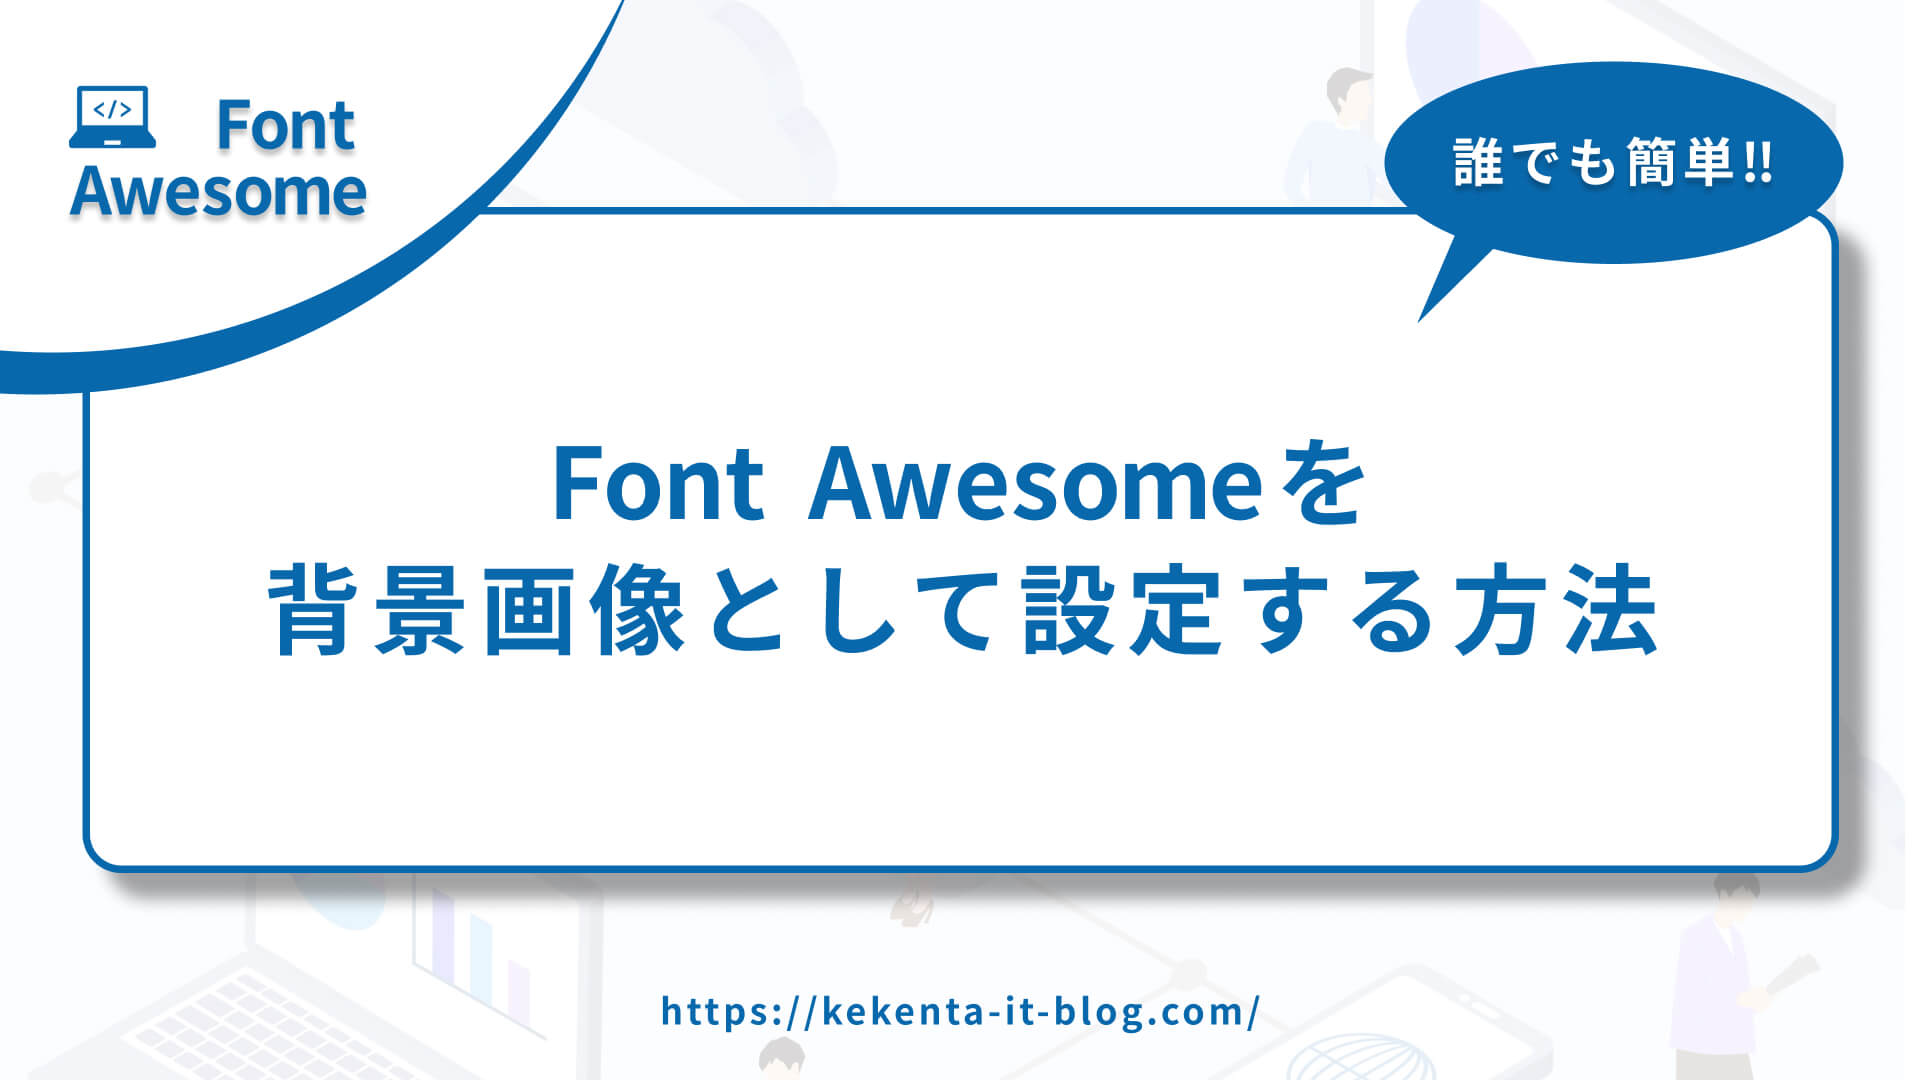 【Font Awesome】背景画像として使用する方法【CSS】